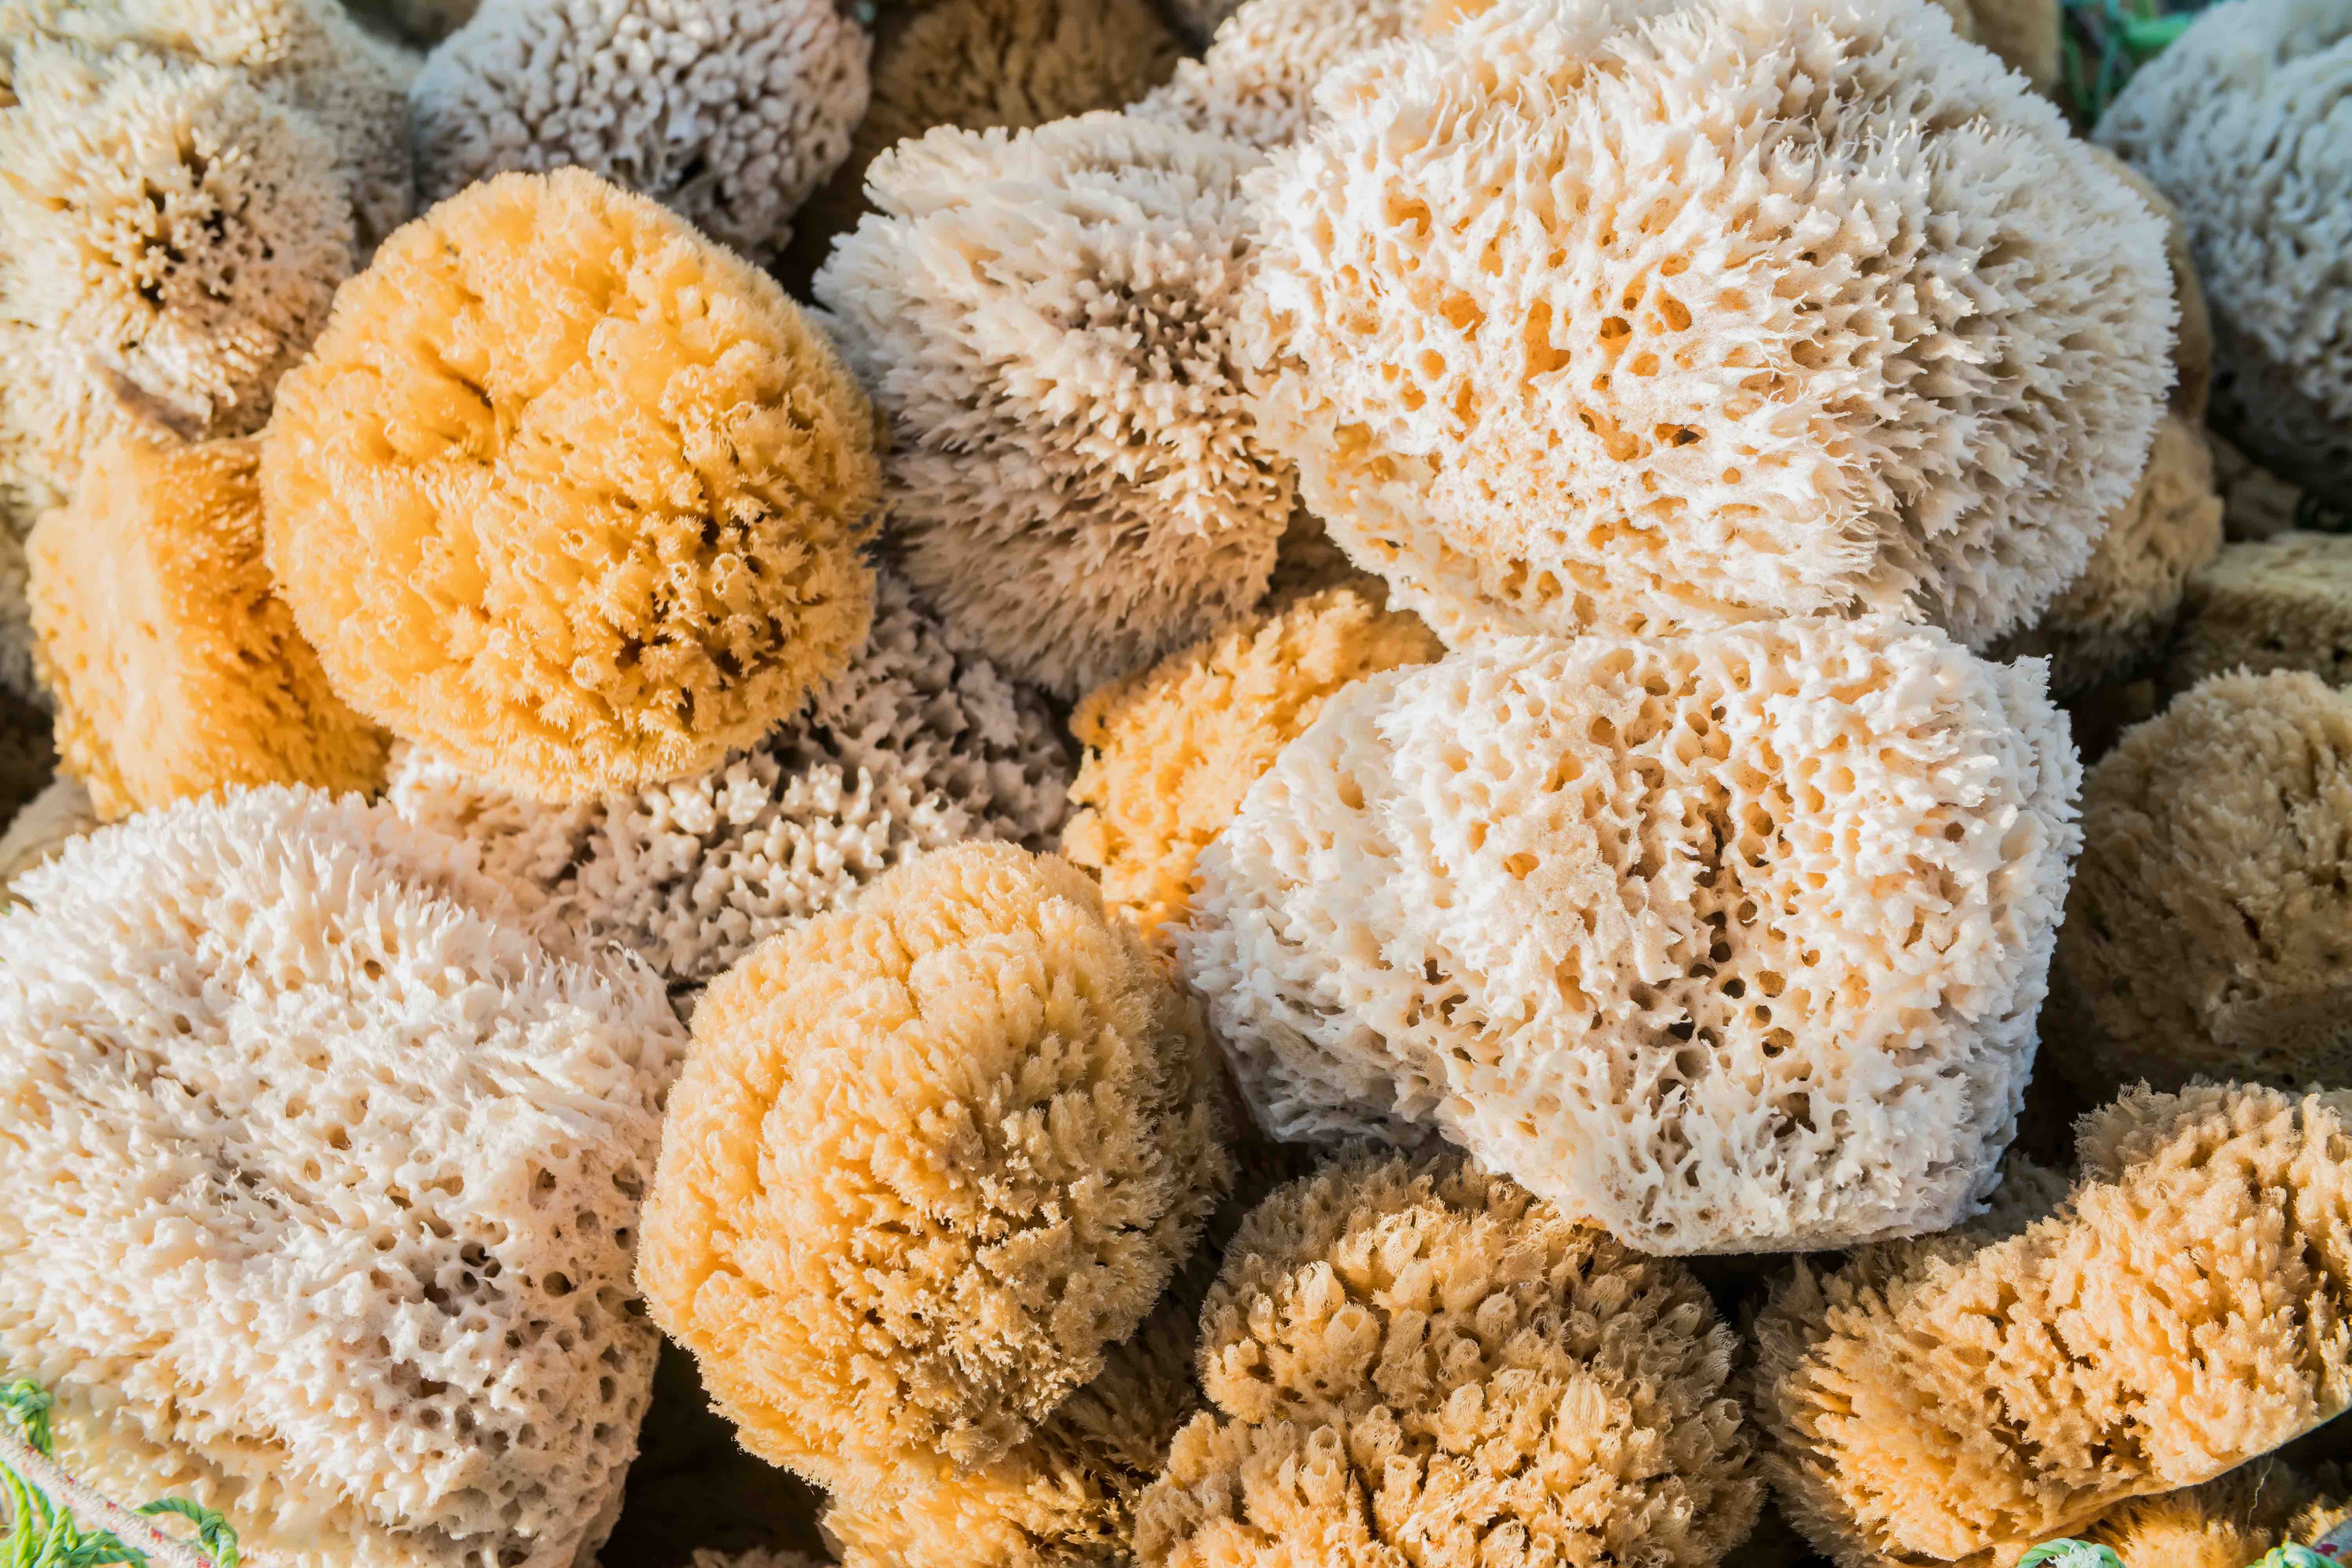 Amazing facts and secrets of sea sponges